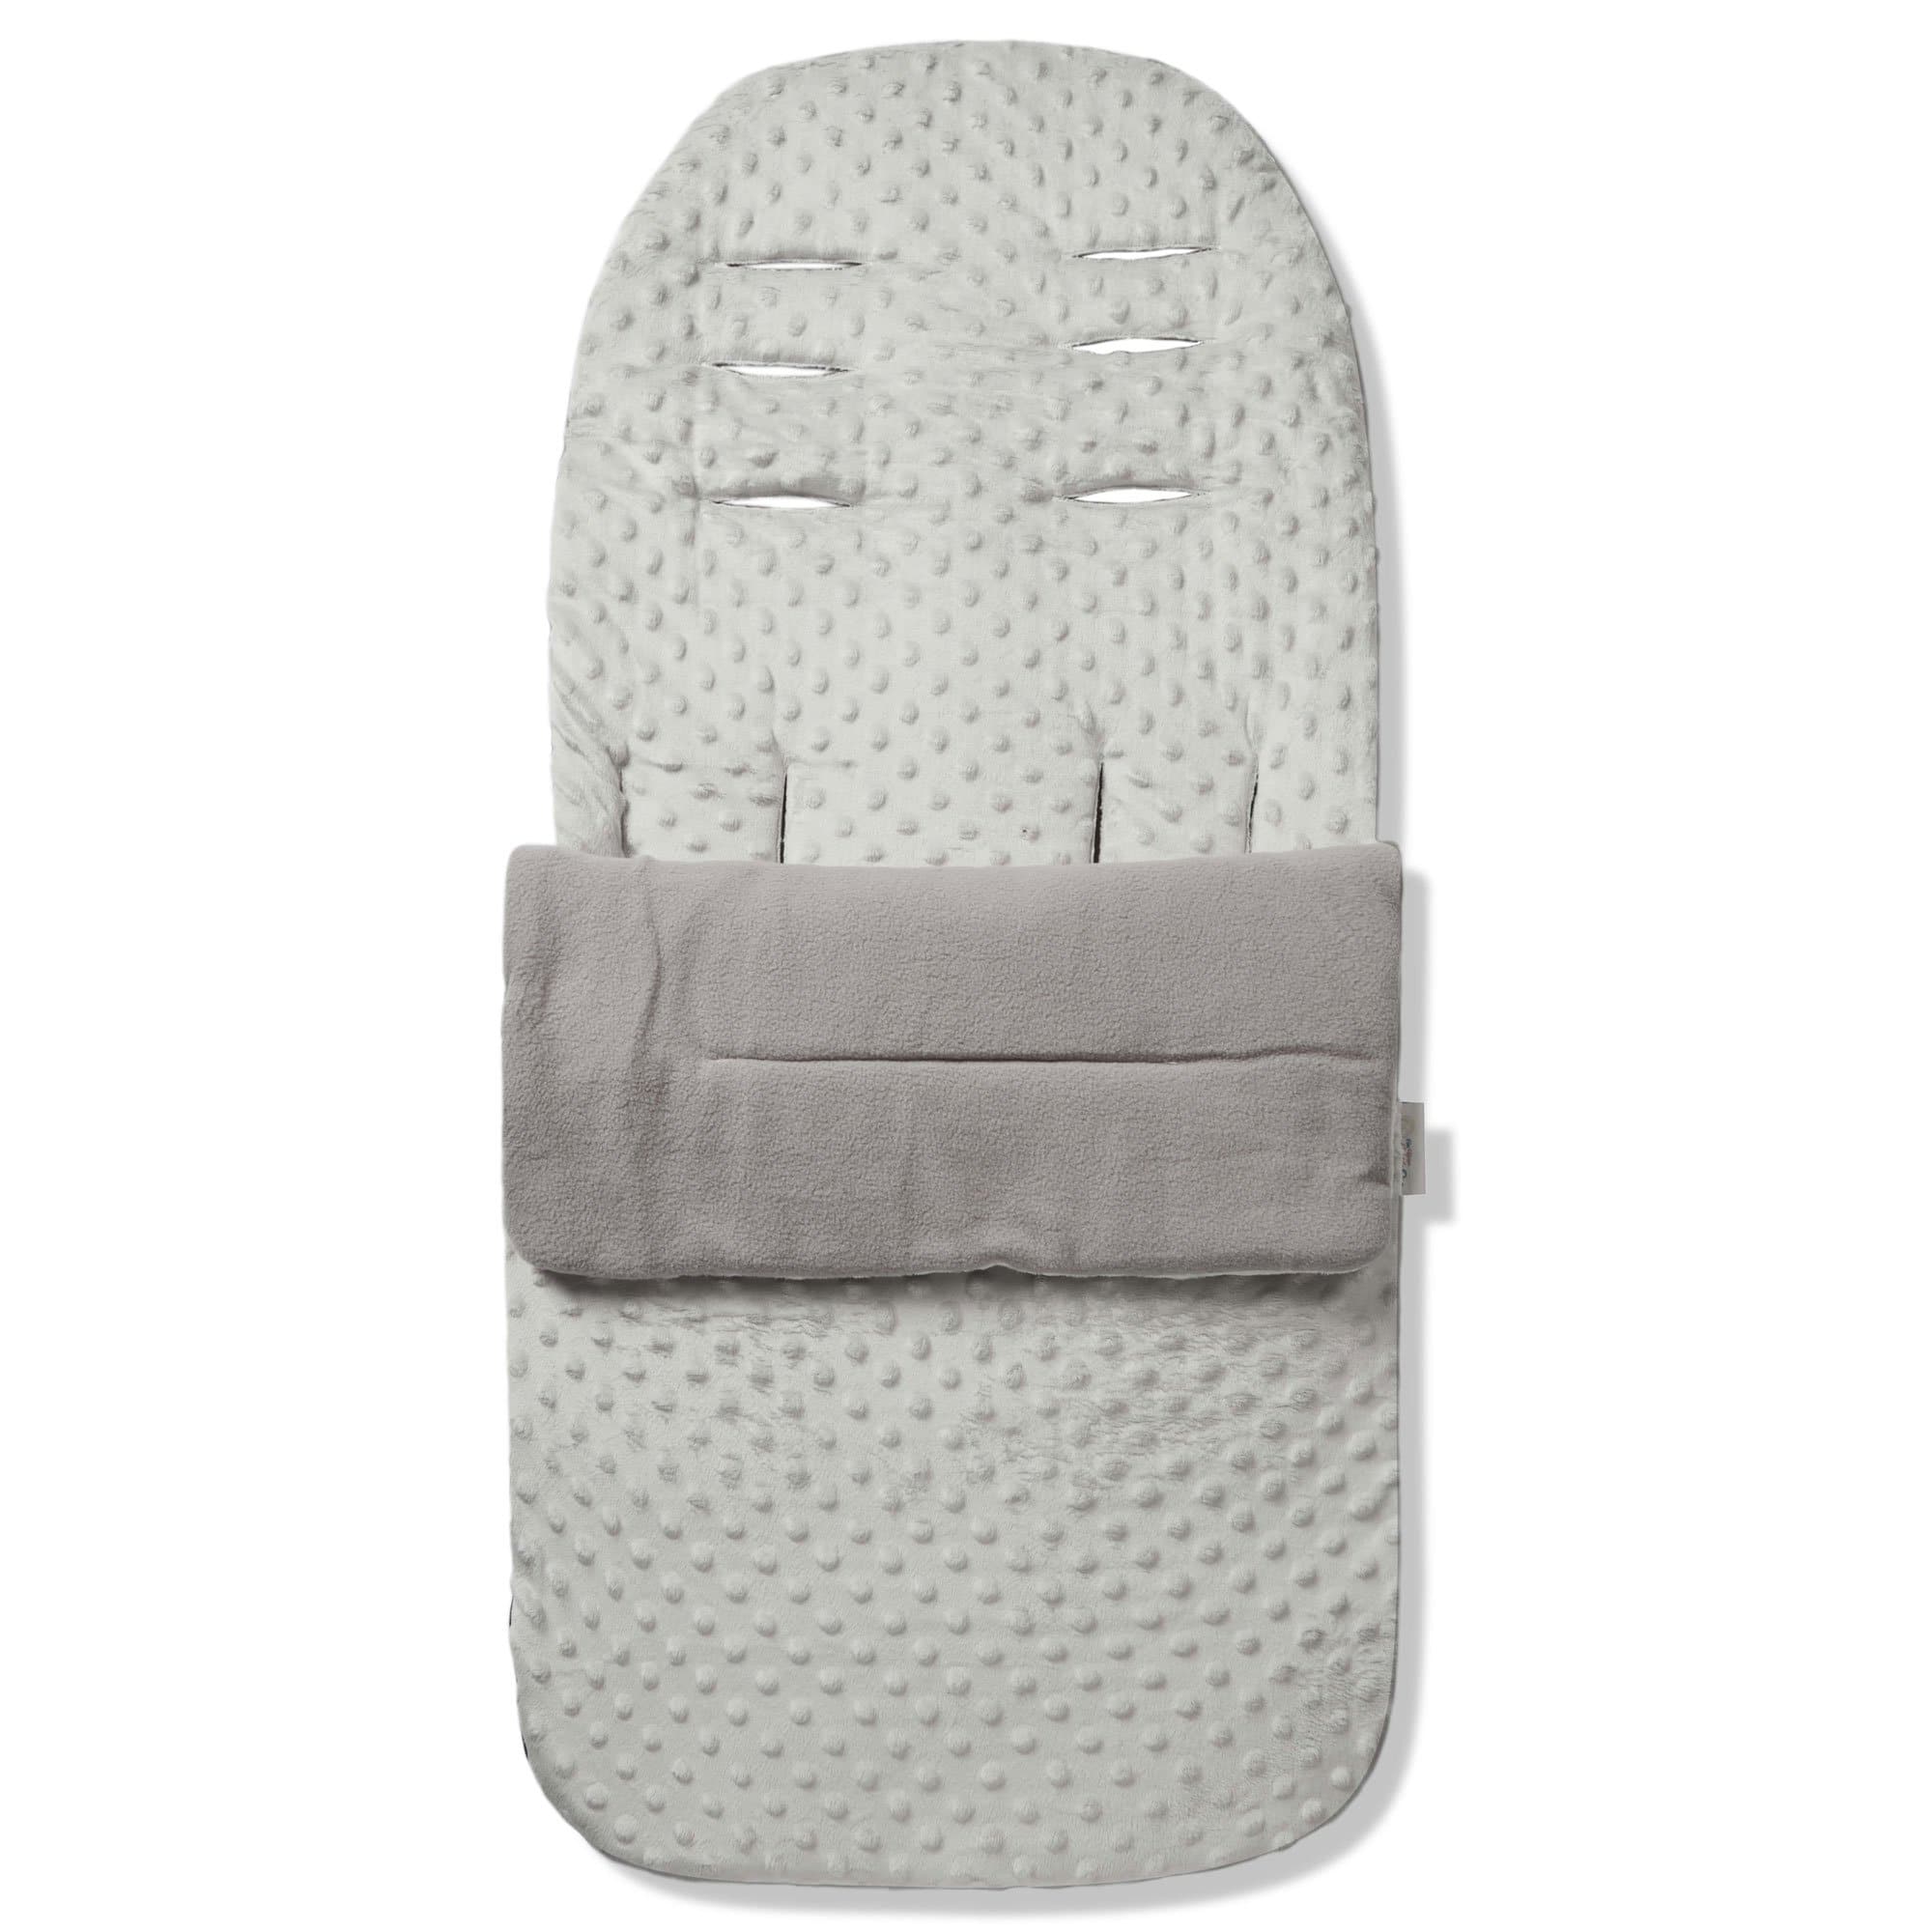 Dimple Footmuff / Cosy Toes Compatible with Bloom - Grey / Fits All Models | For Your Little One